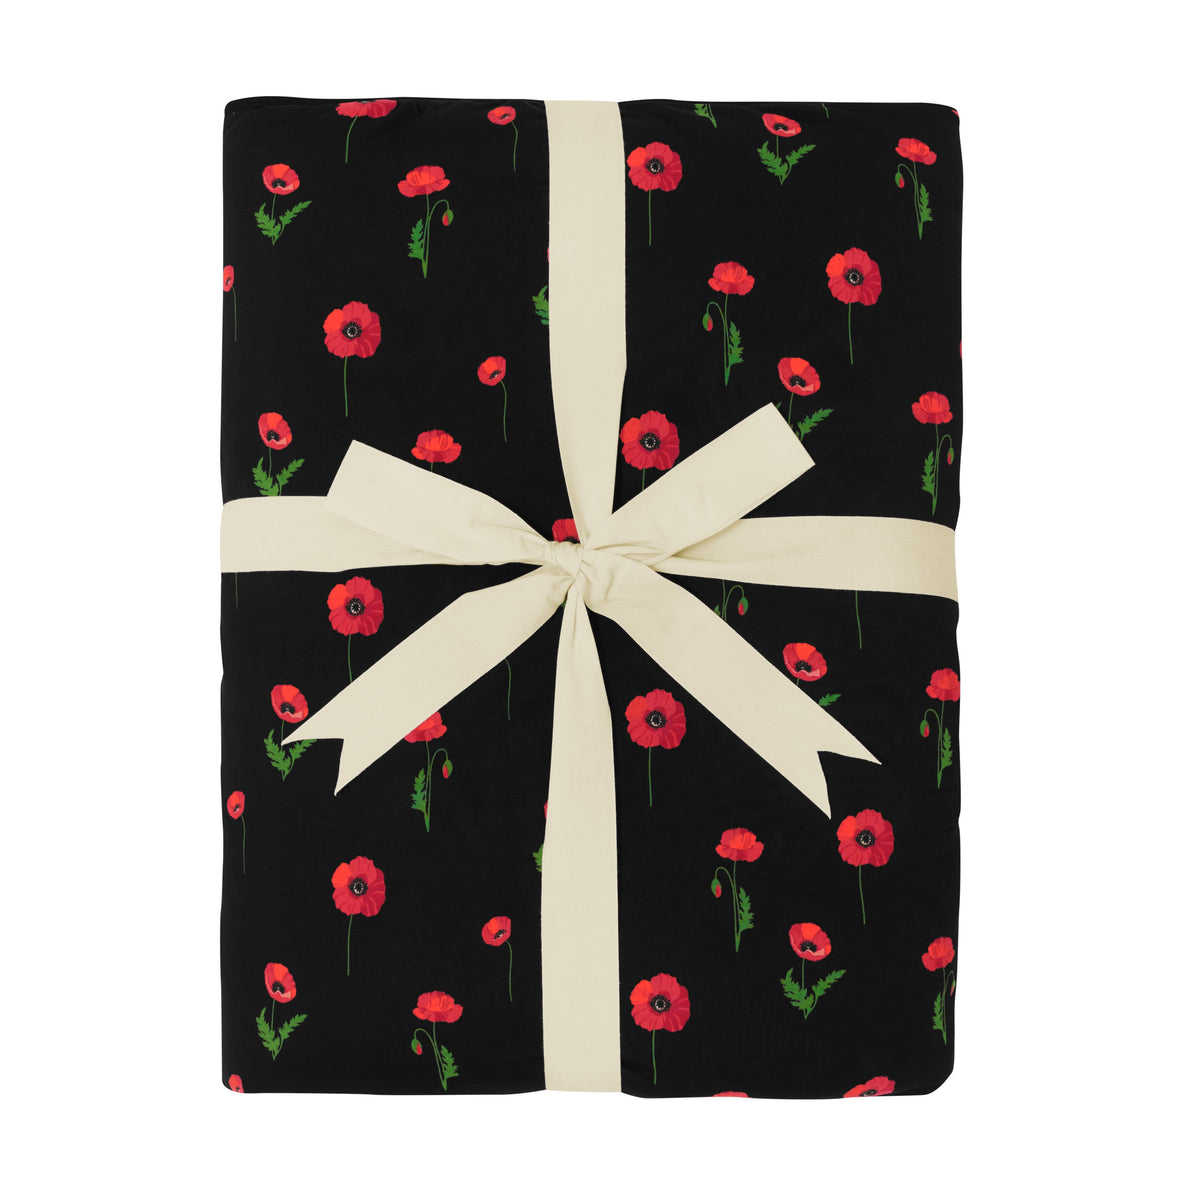 Kyte Baby Youth Blanket Midnight Poppies / Youth Youth Blanket in Midnight Poppies 2.5